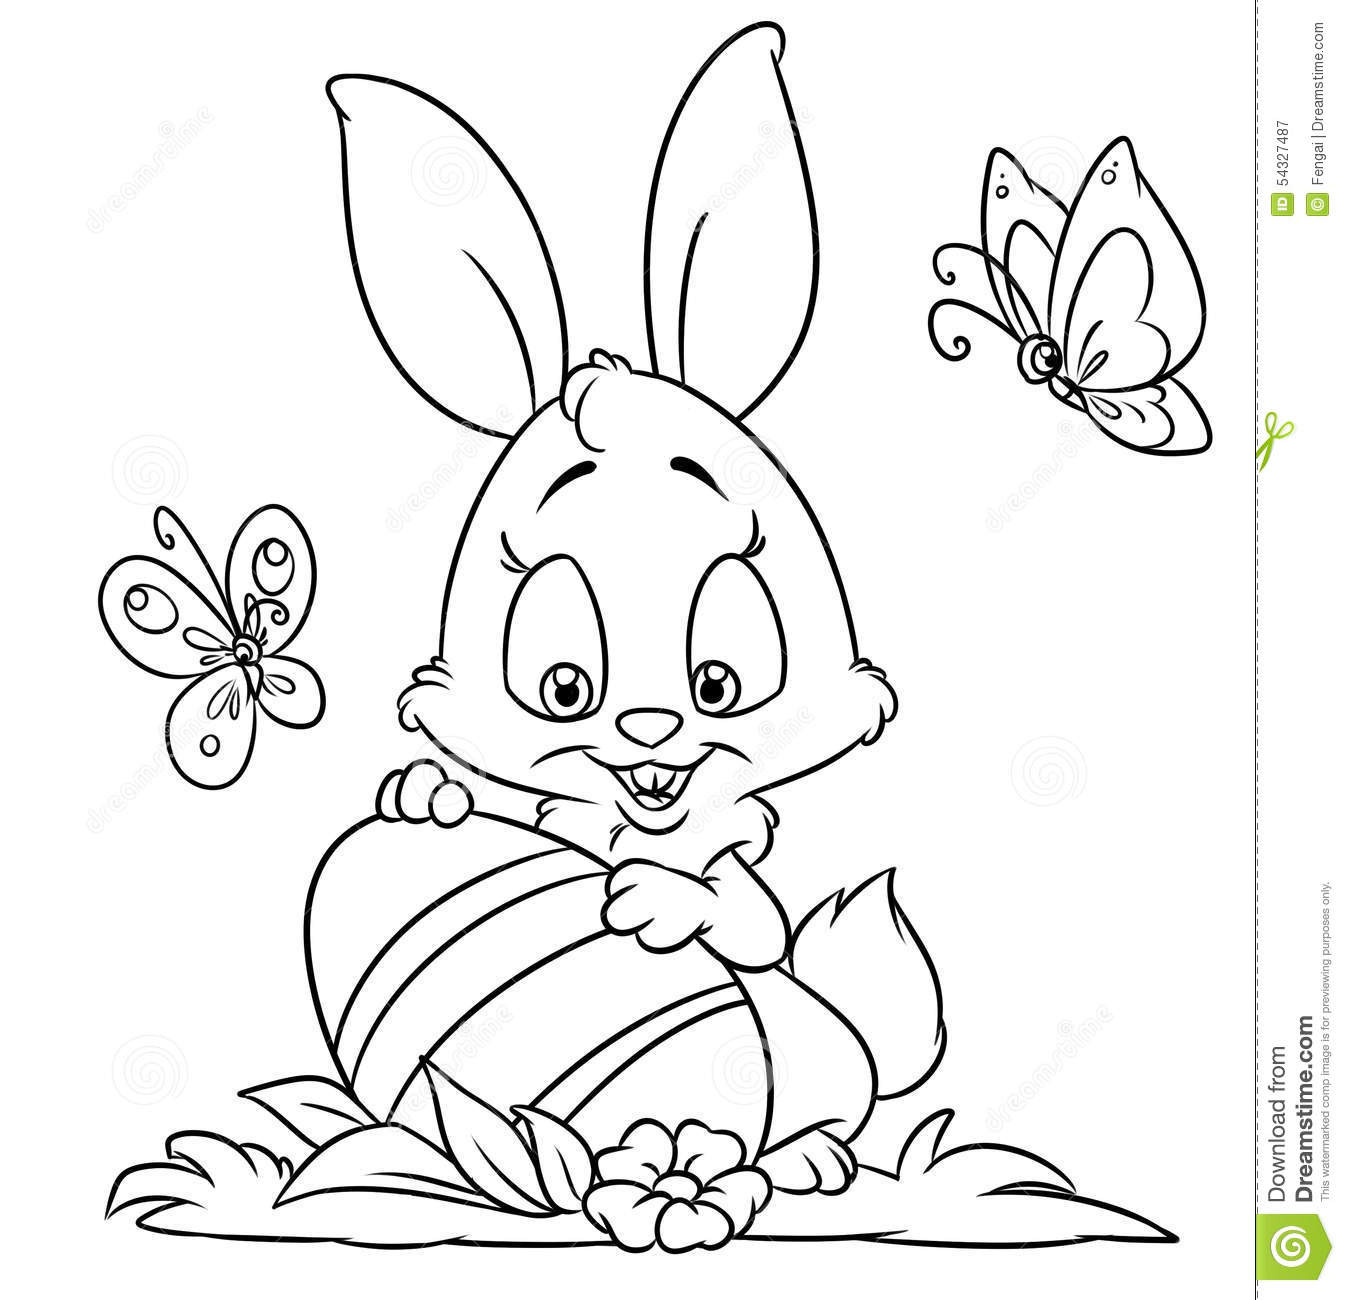 Happy Easter Coloring Pages
 Happy Easter Bunny Coloring Pages – Happy Easter